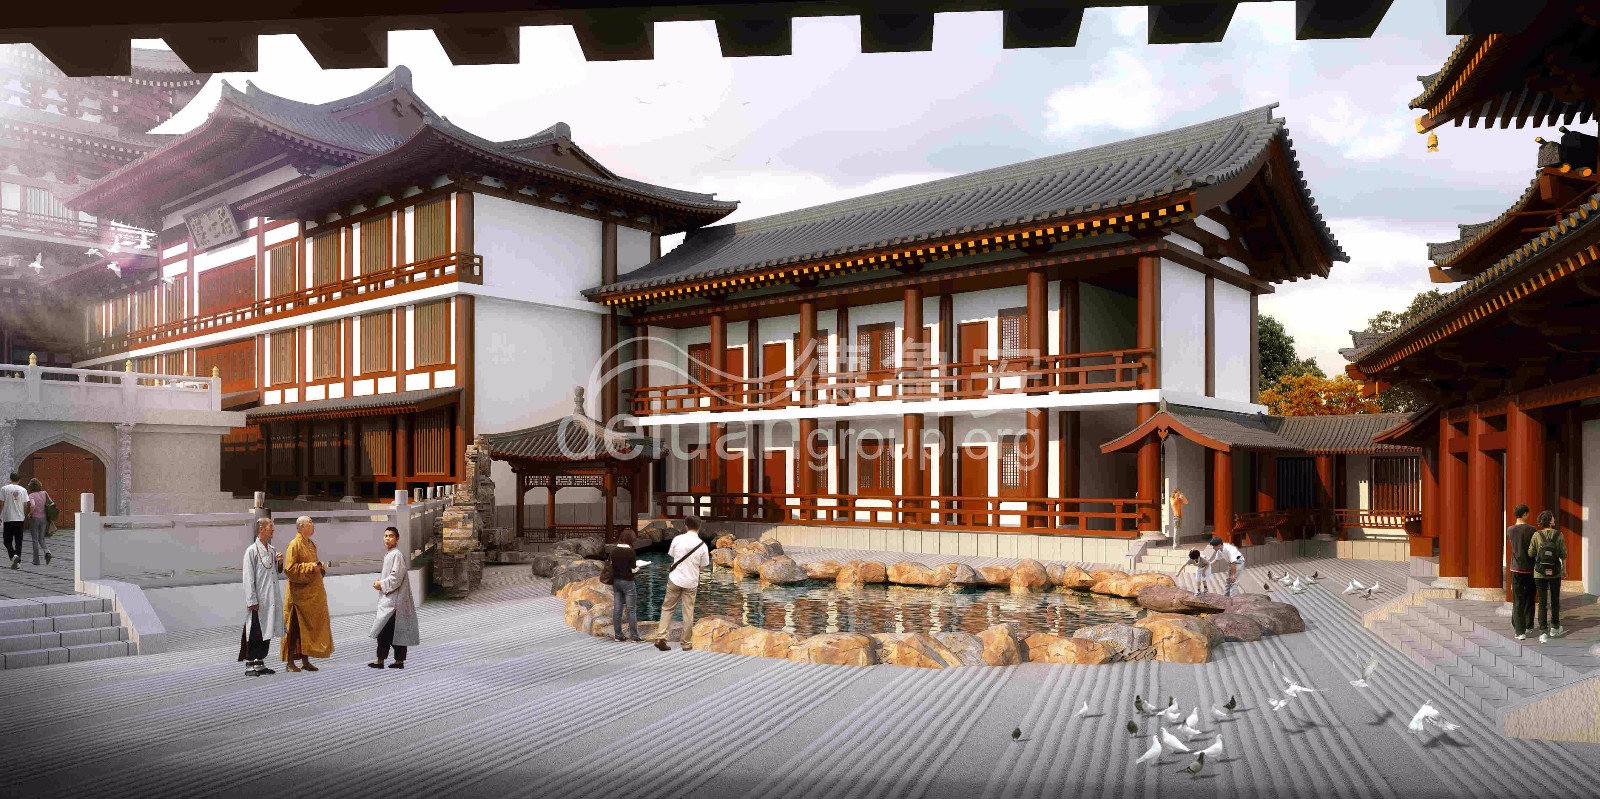 Planning and design of Baoqing temple in Xianghe0(图15)